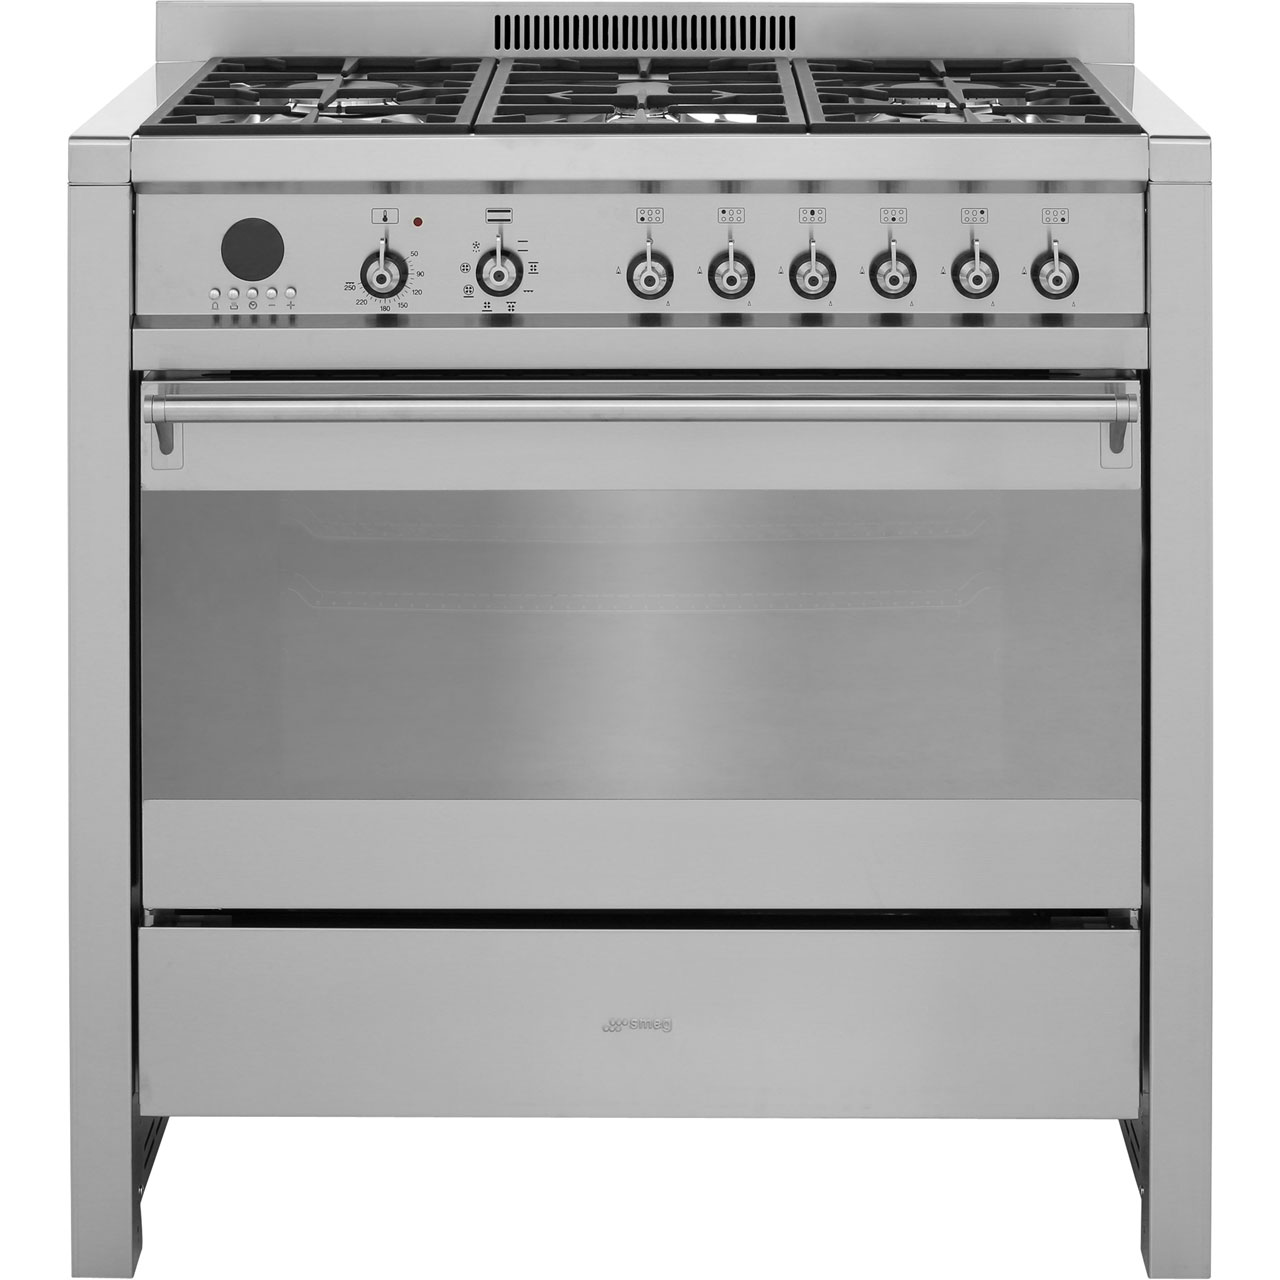 Smeg Opera A1-7 Free Standing Range Cooker in Stainless Steel